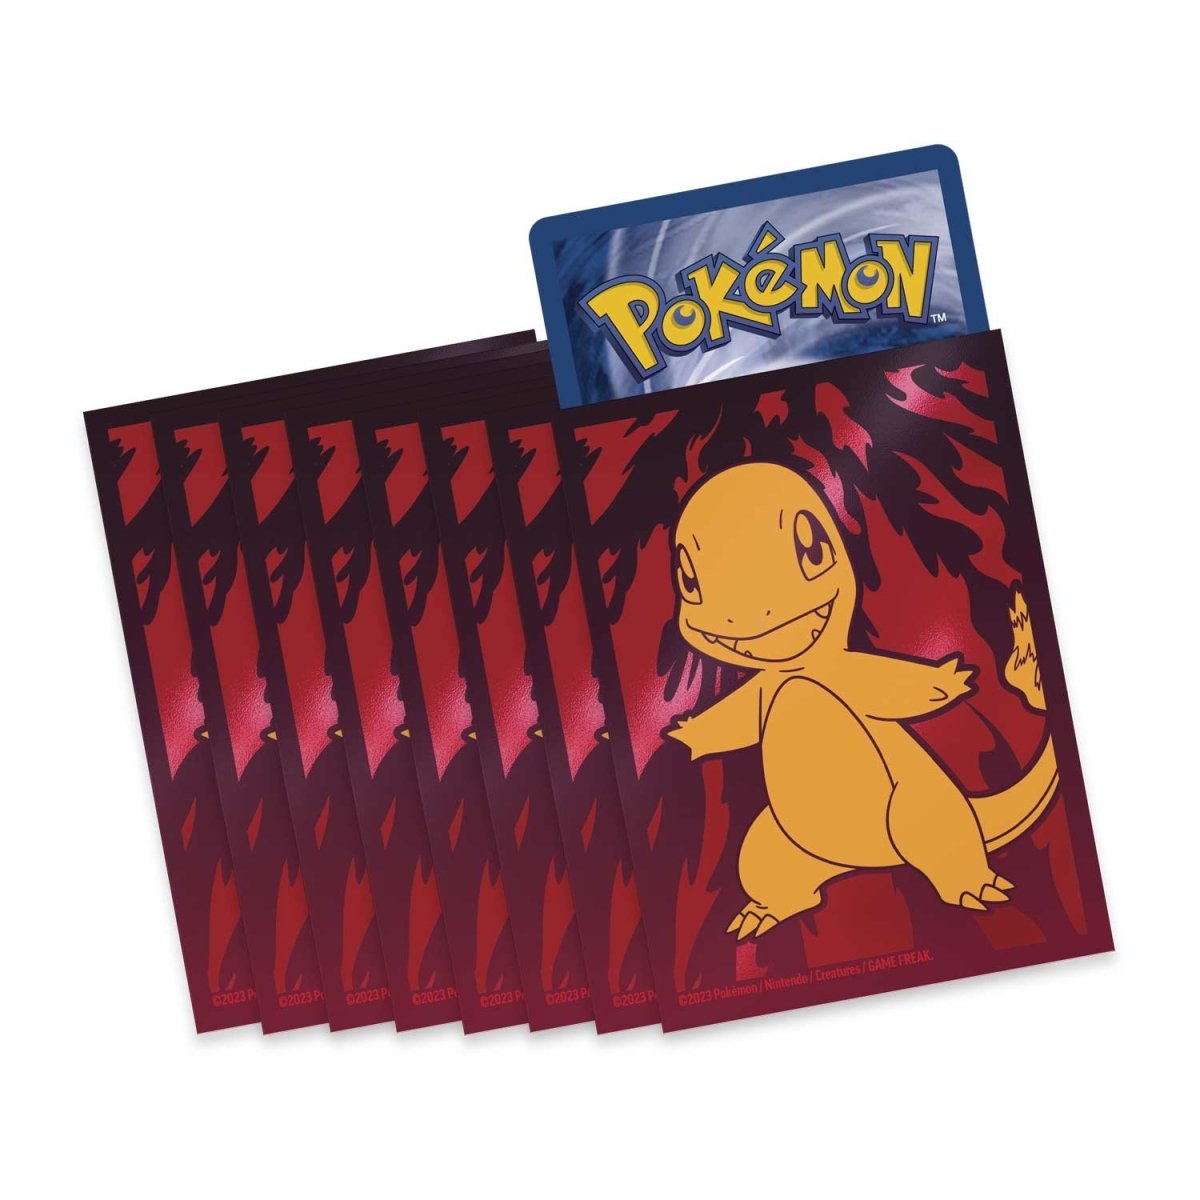 Charmander sleeves are also included in the elite trainer box.